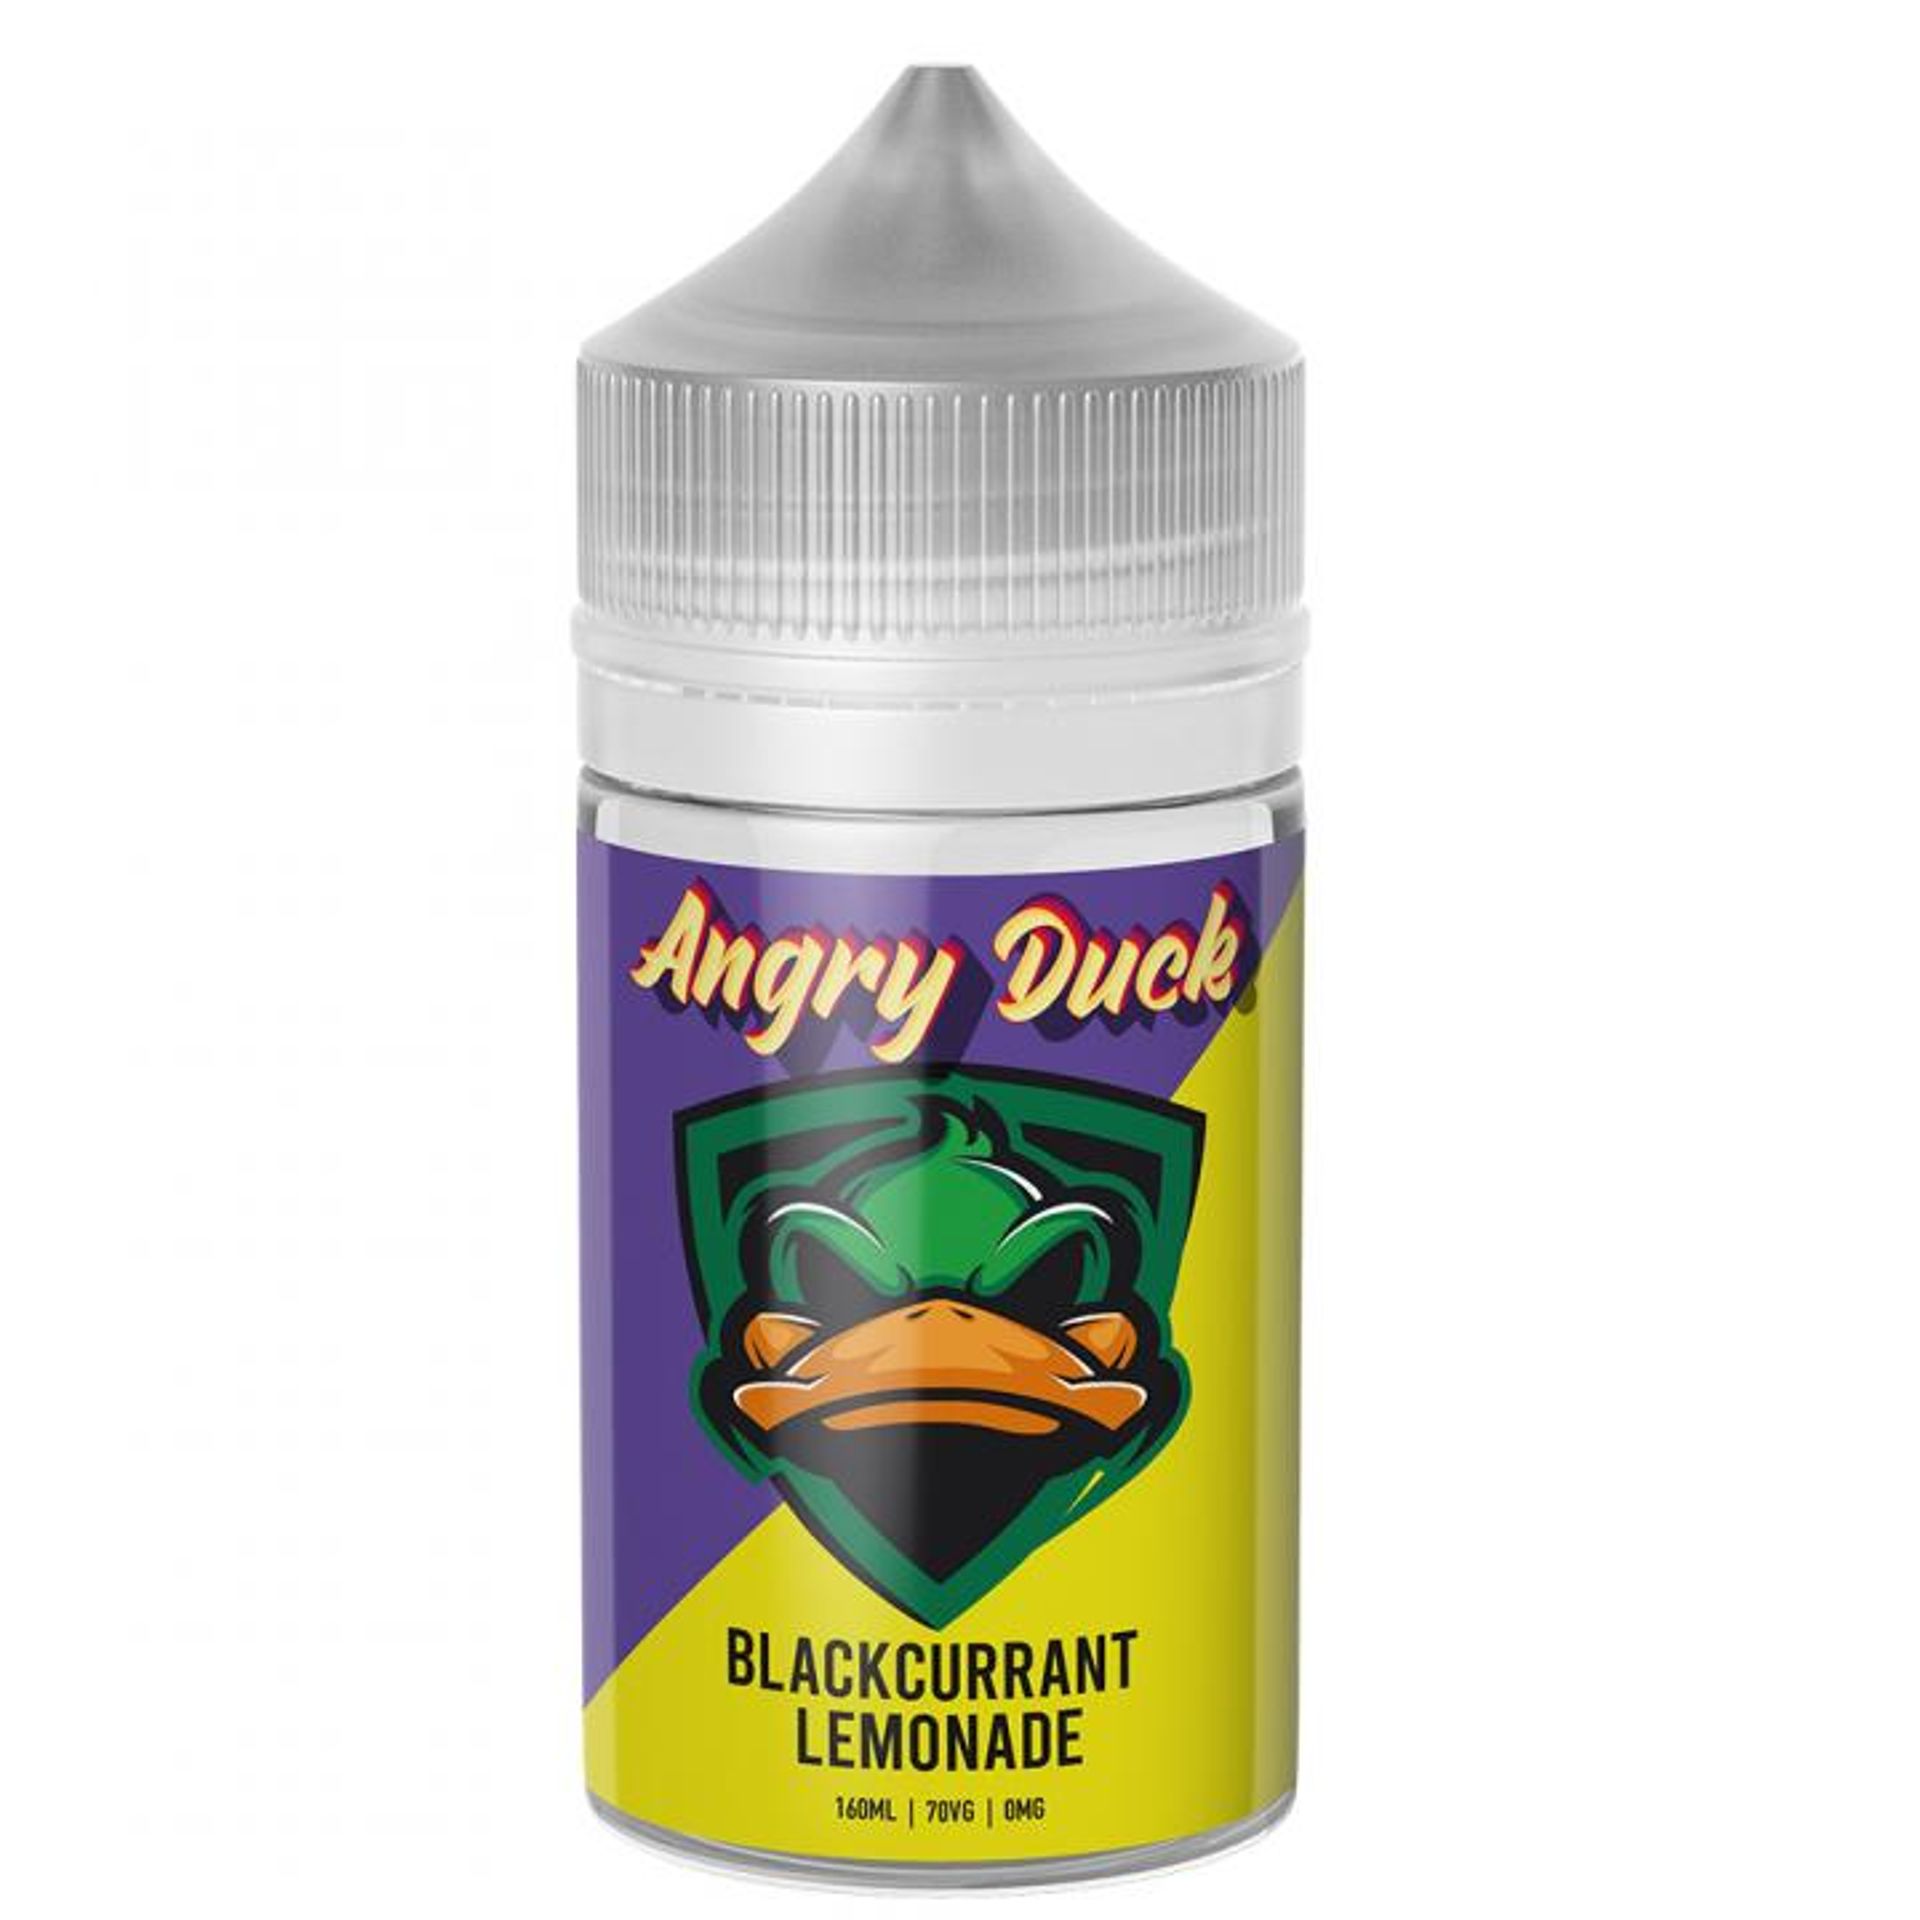 Image of Blackcurrant Lemonade by Angry Duck